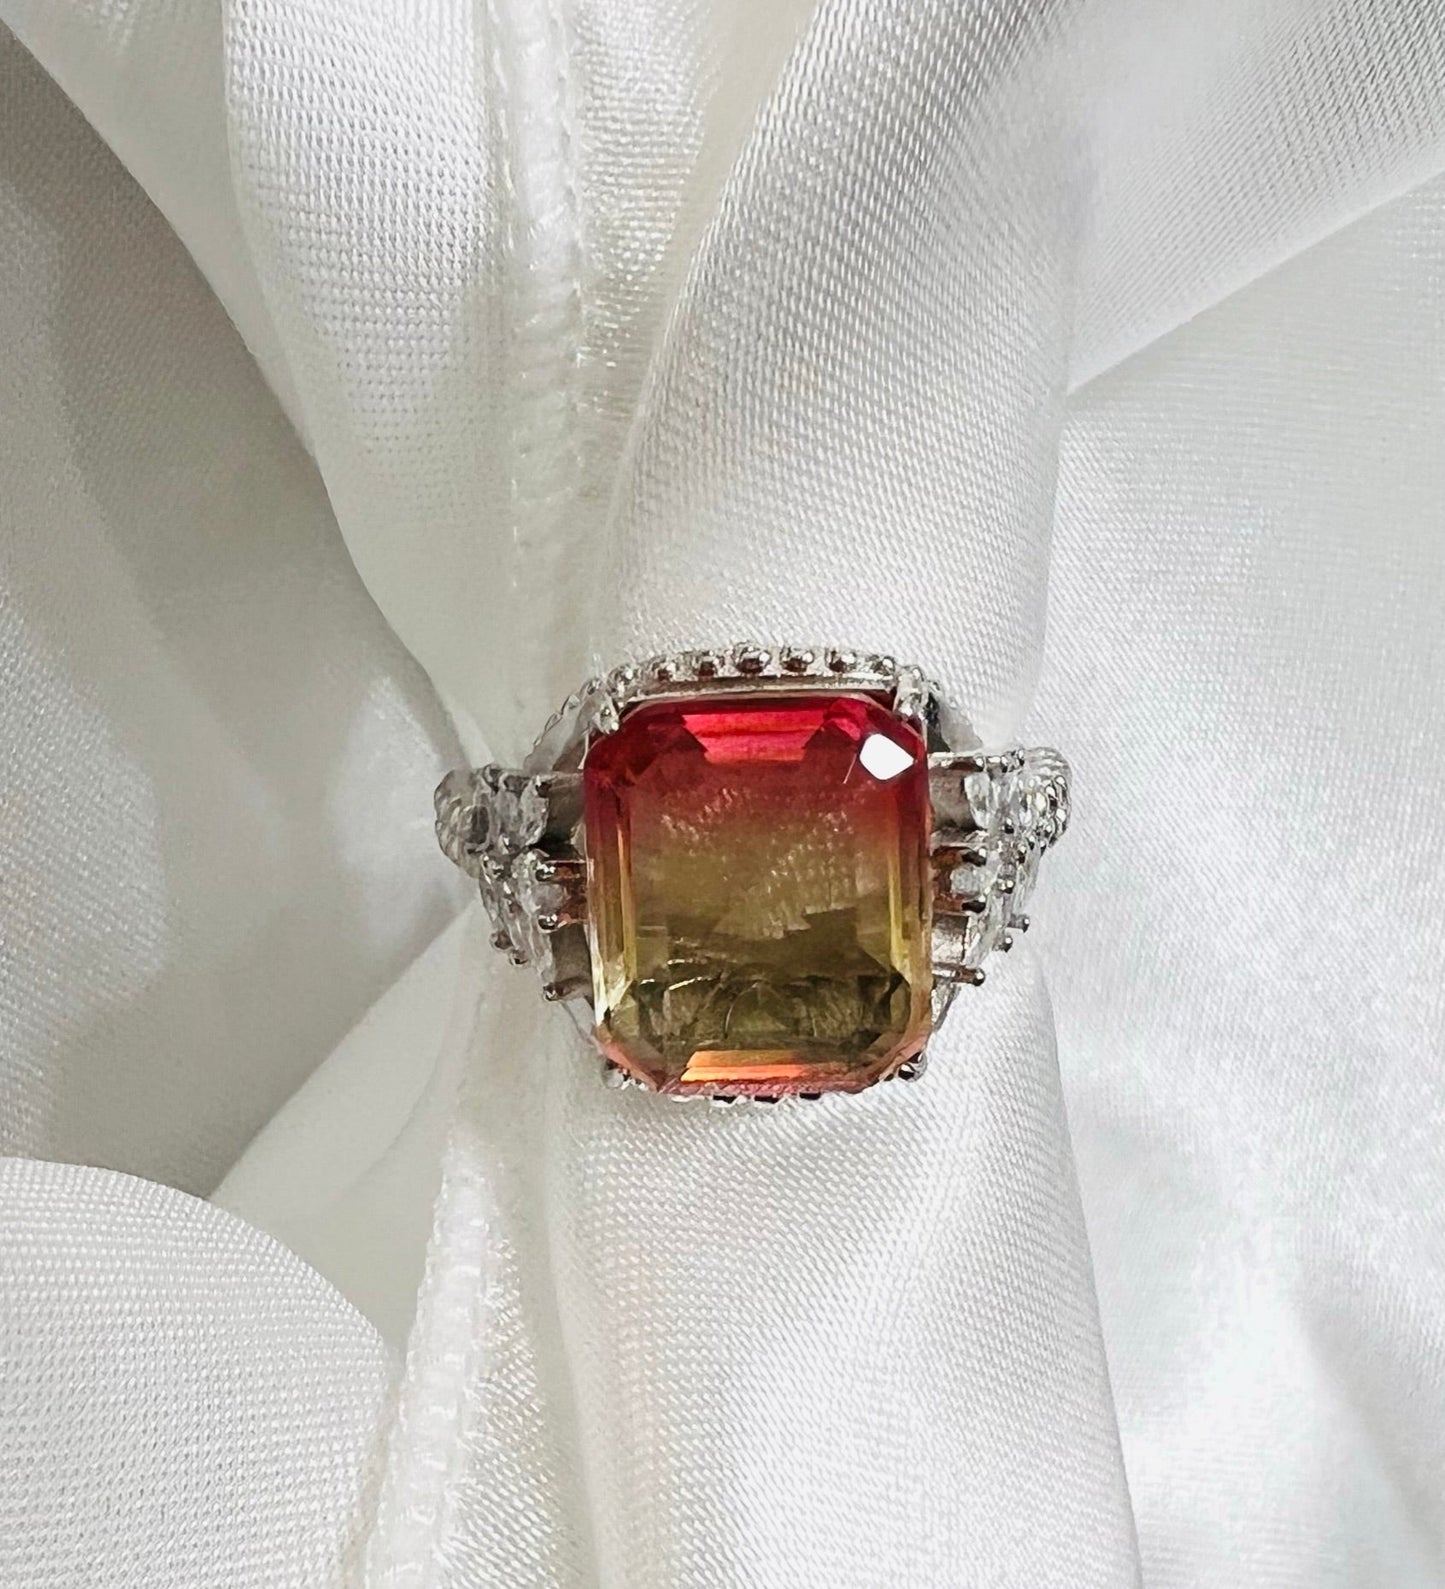 *PRE-ORDER - Emerald-Cut Delicate Rose Yellow Bi-Colored Simulated Tourmaline Beaded Shank 925 Sterling Silver Ring